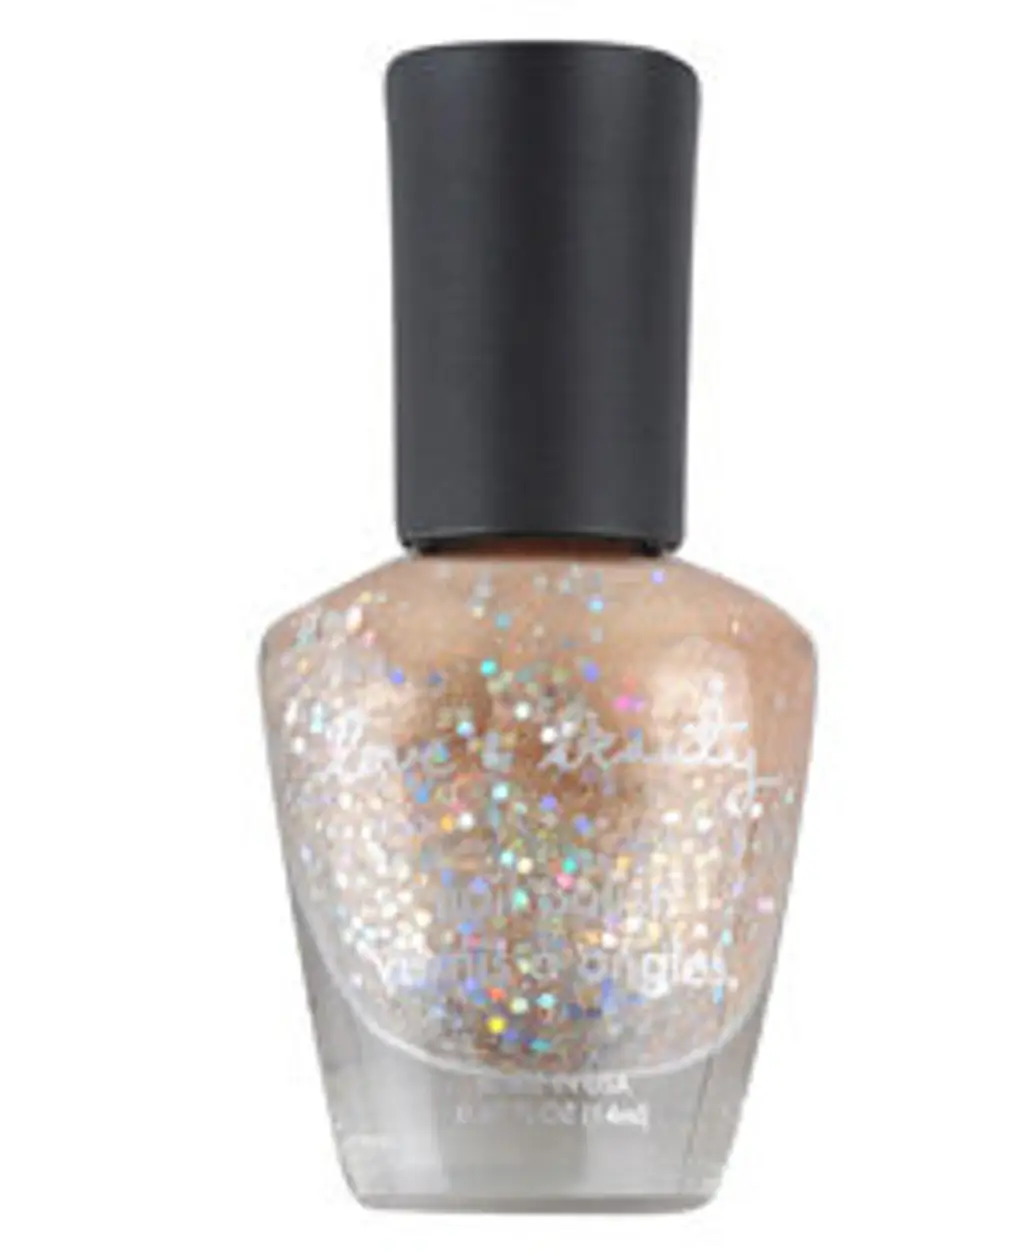 Forever21 Nail Polish in Gold Iridescence